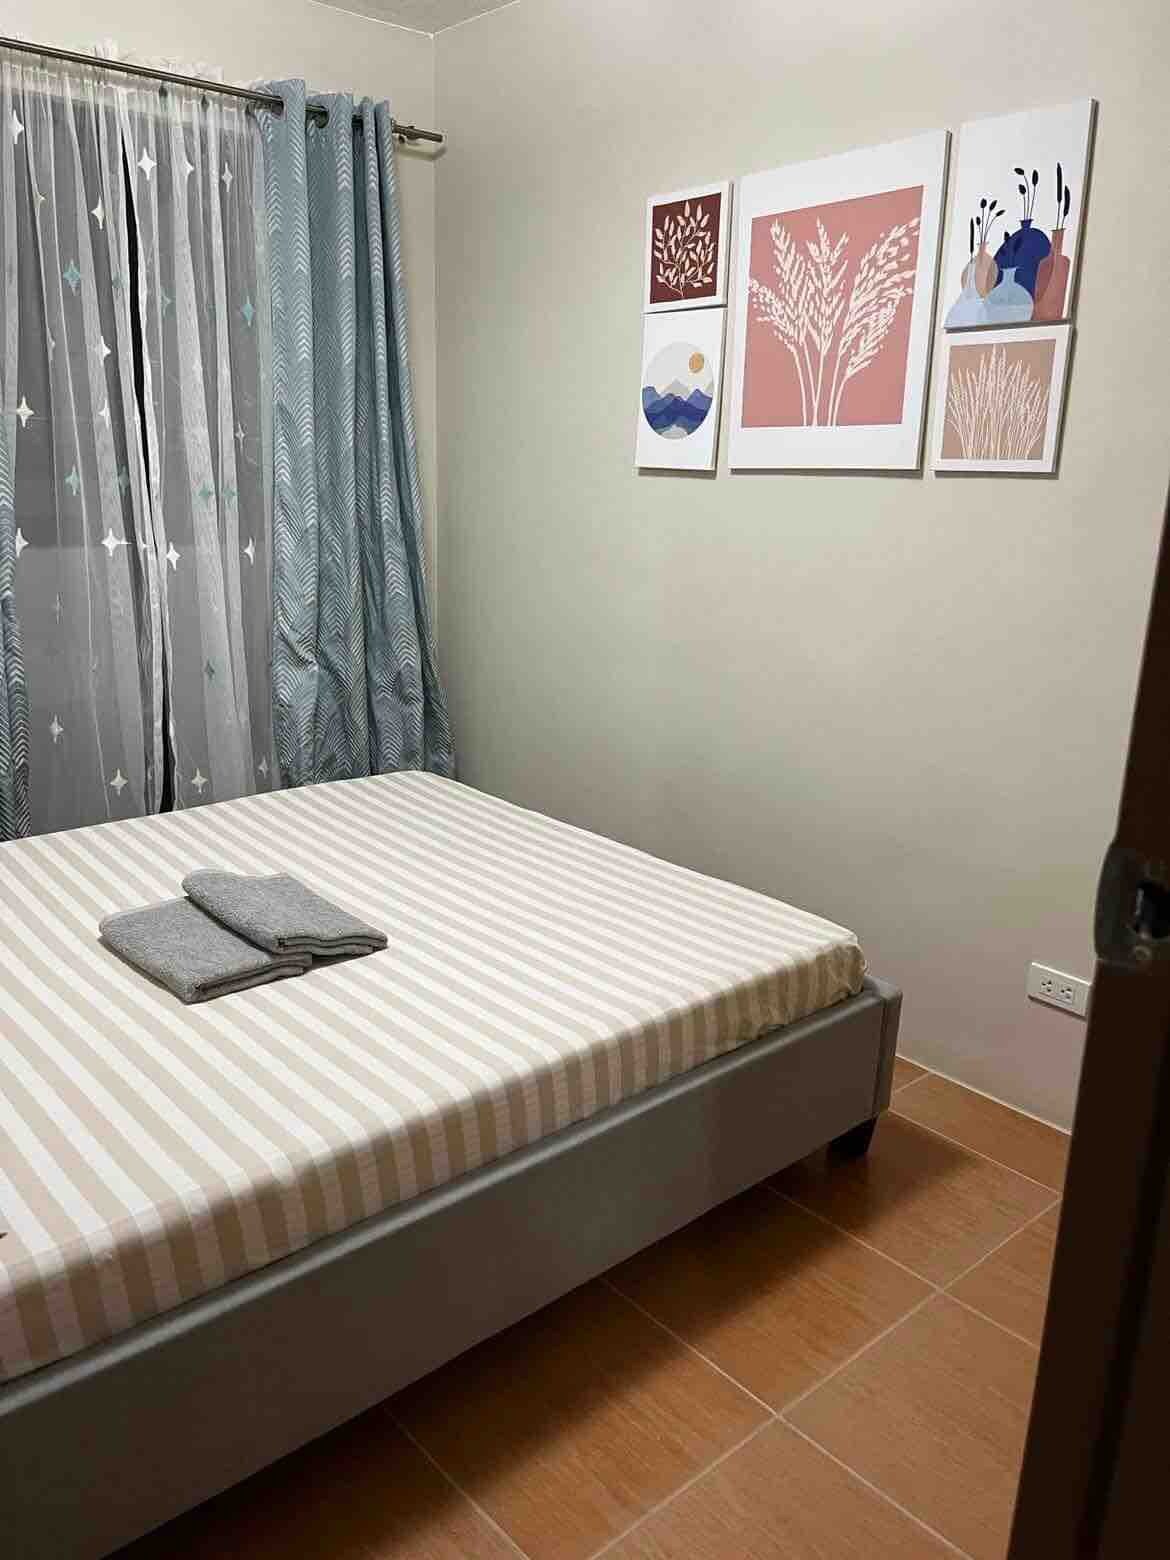 YPJs New Lovely  2BR Condo at Oasis CdeO w Cable